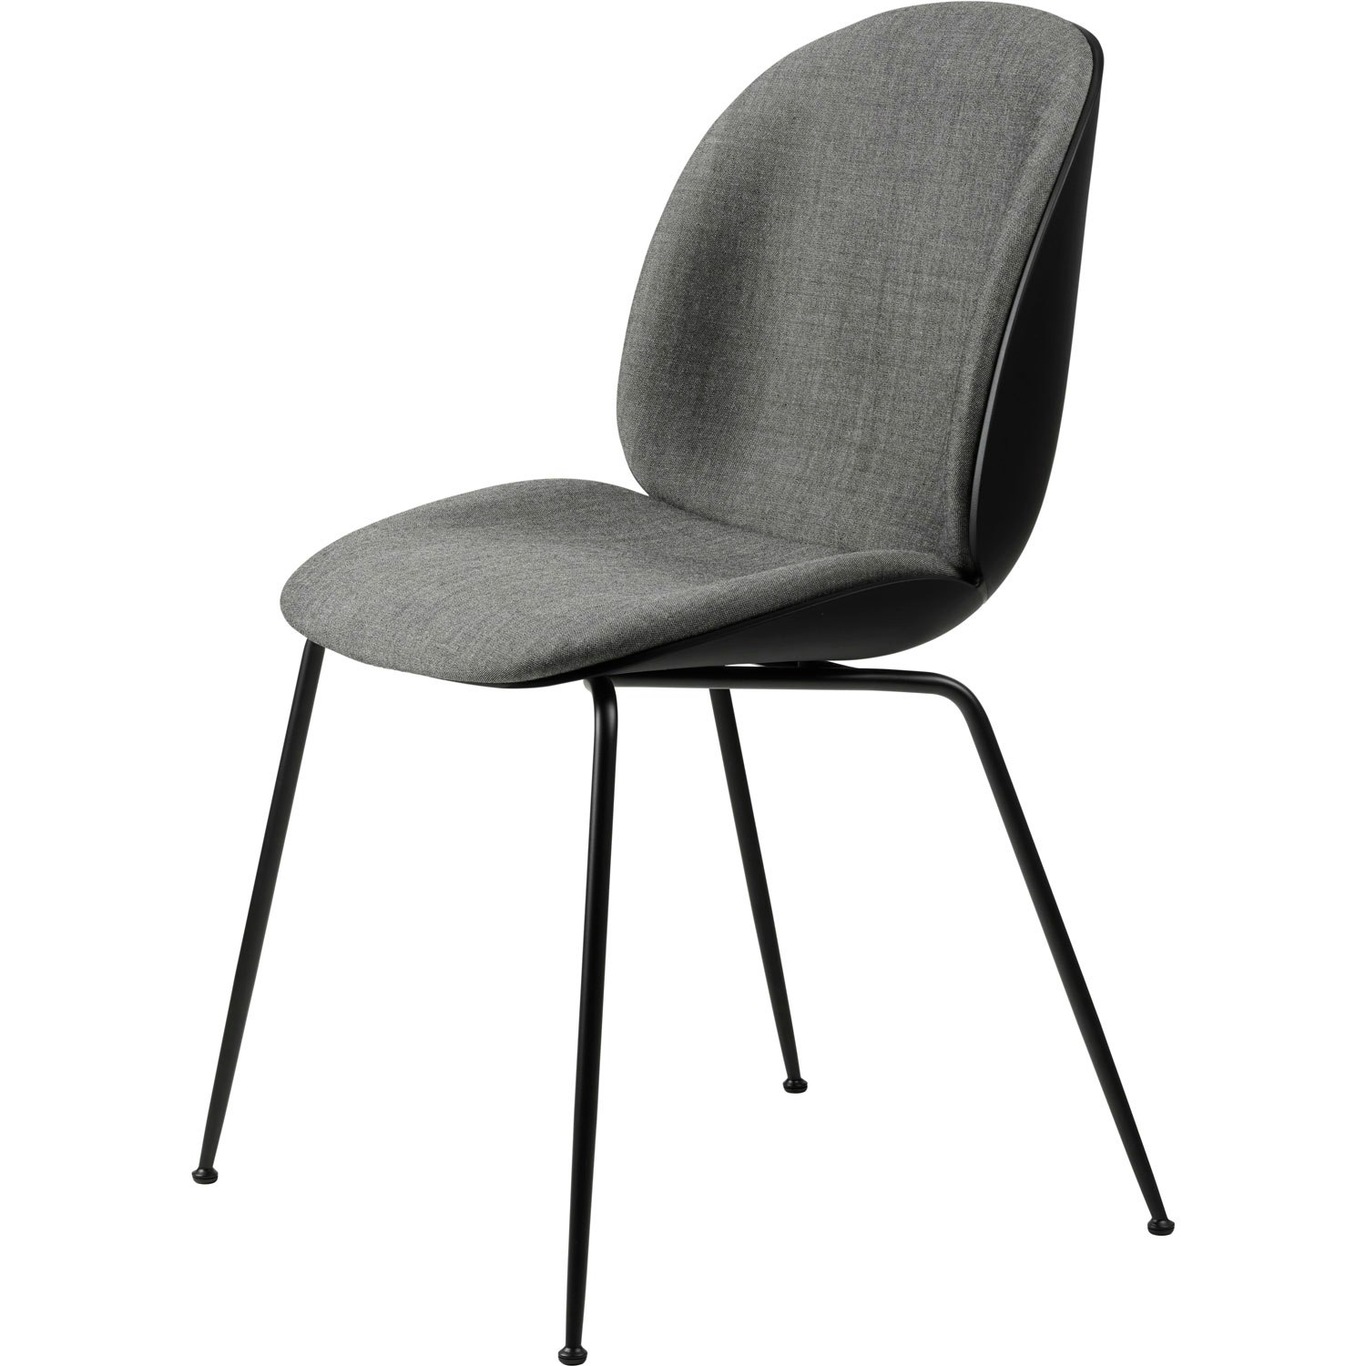 Beetle Chair Upholstered Front / Conical Base, Remix 3 152